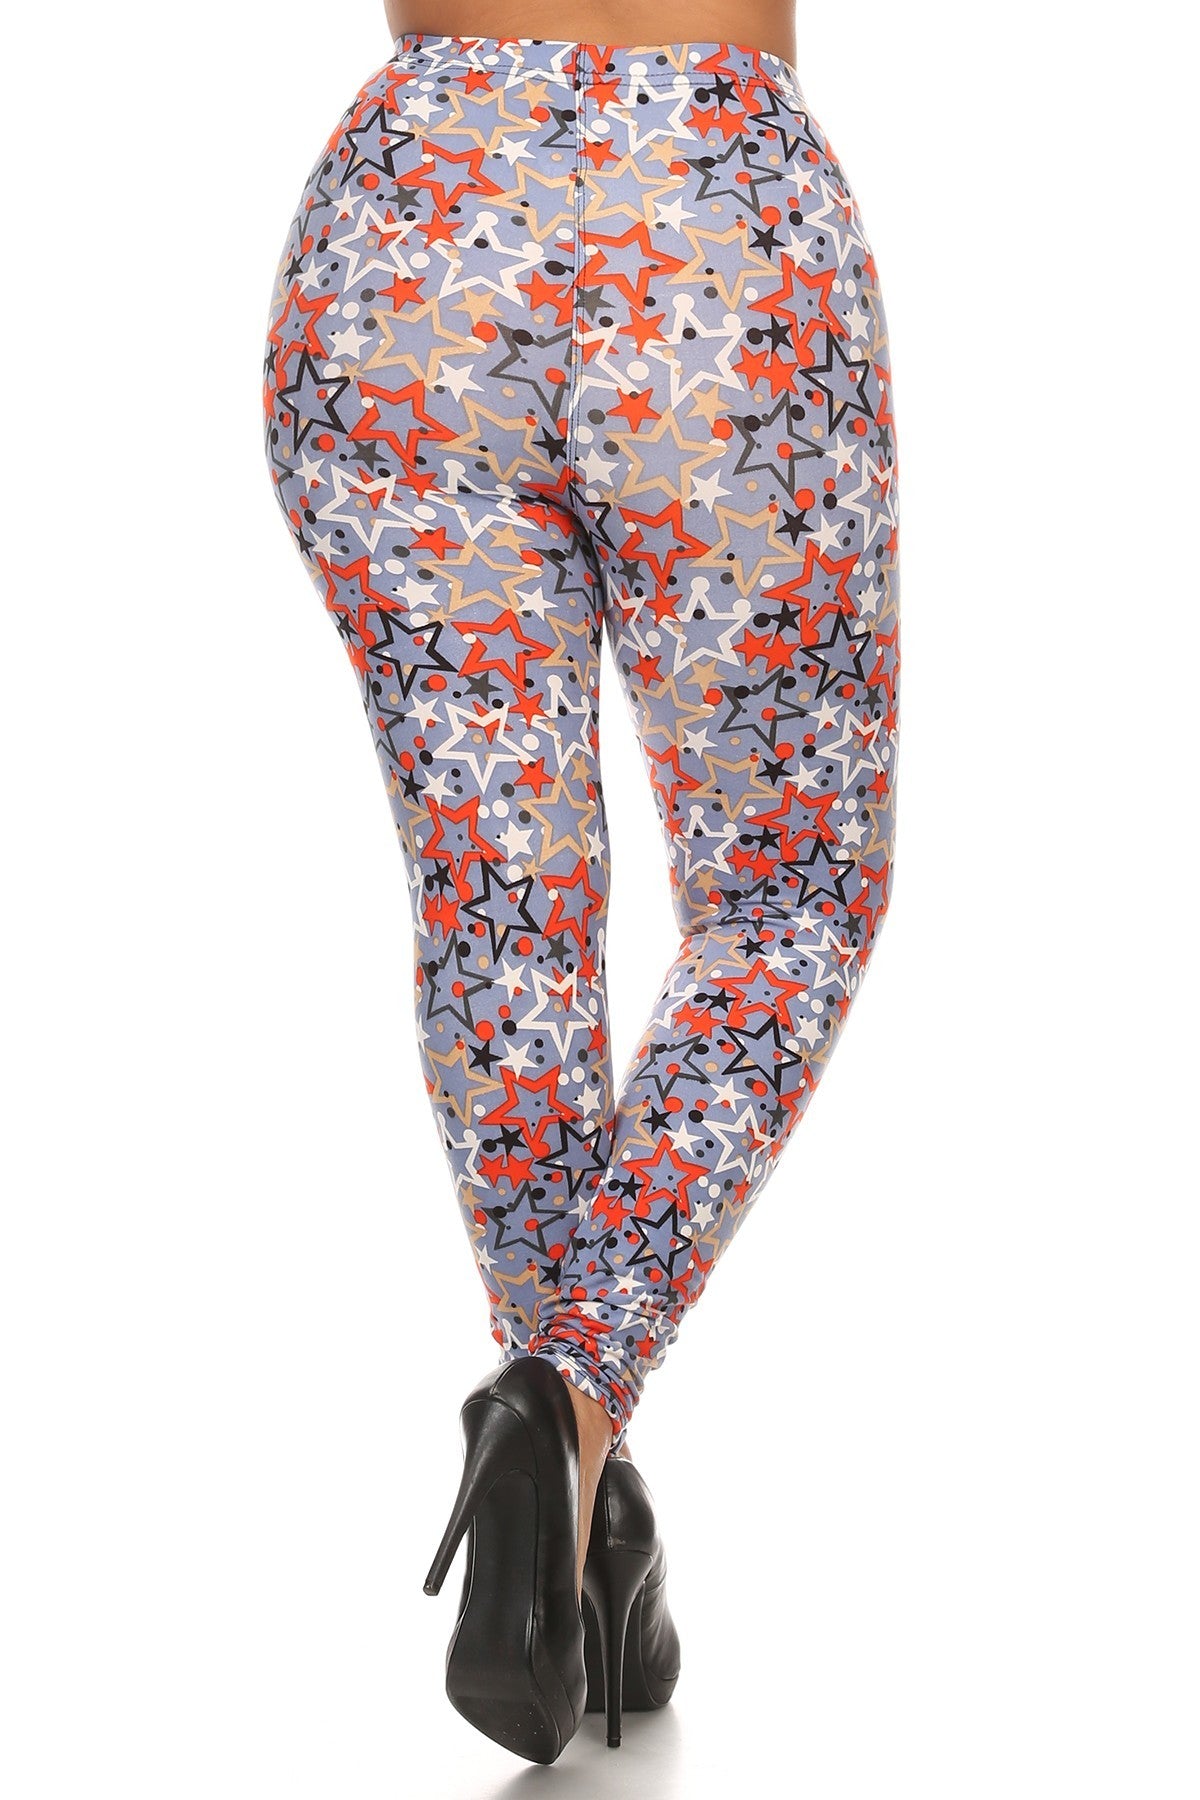 Plus Star Print, Full Length Leggings In A Slim Fitting Style With A Banded High Waist